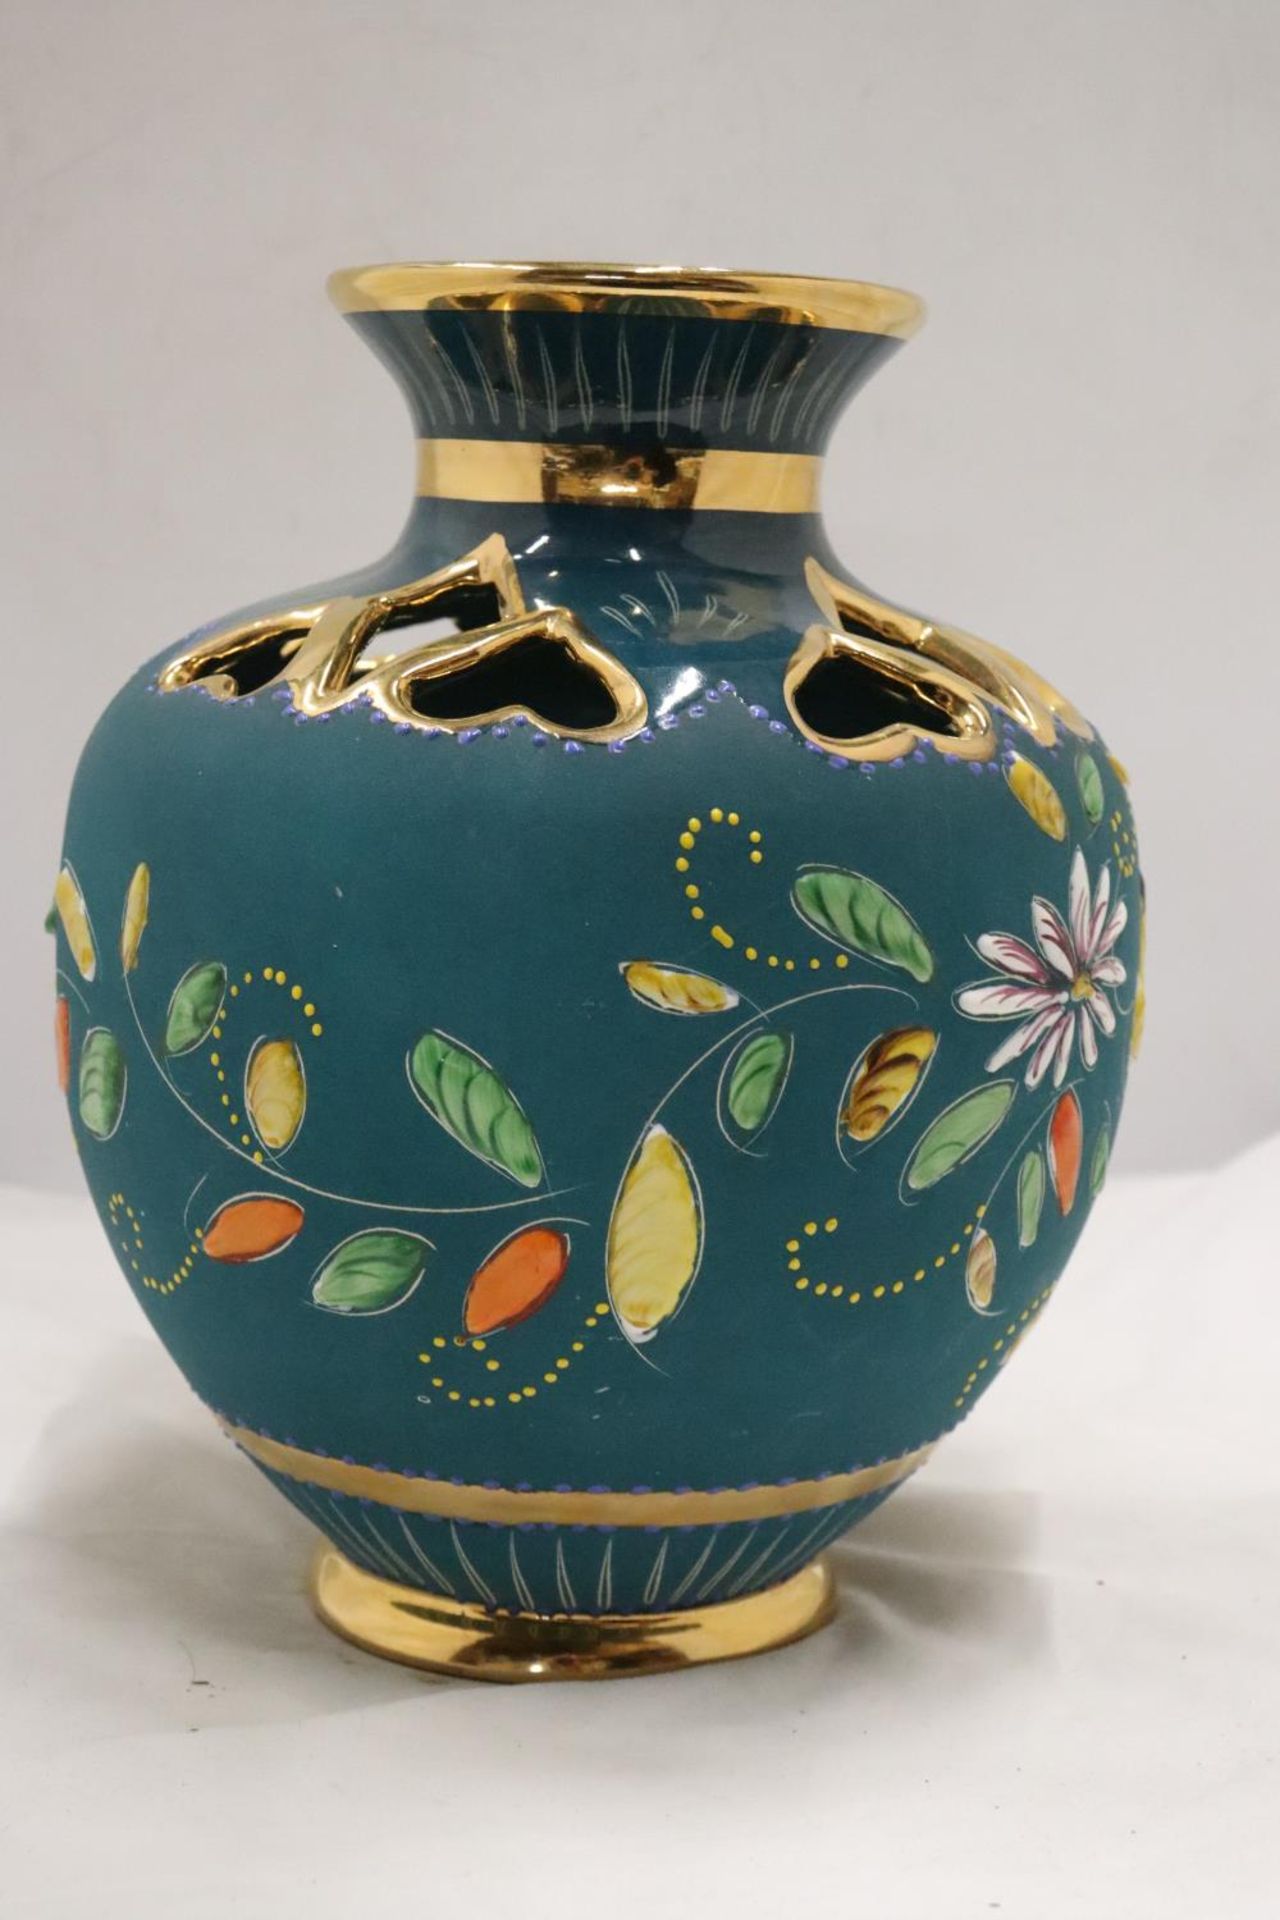 A CONTINENTAL TEAL BLUE VASE WITH THE MARK HB, QUAREGNON, BELGIUM TO THE BASE - Image 3 of 6